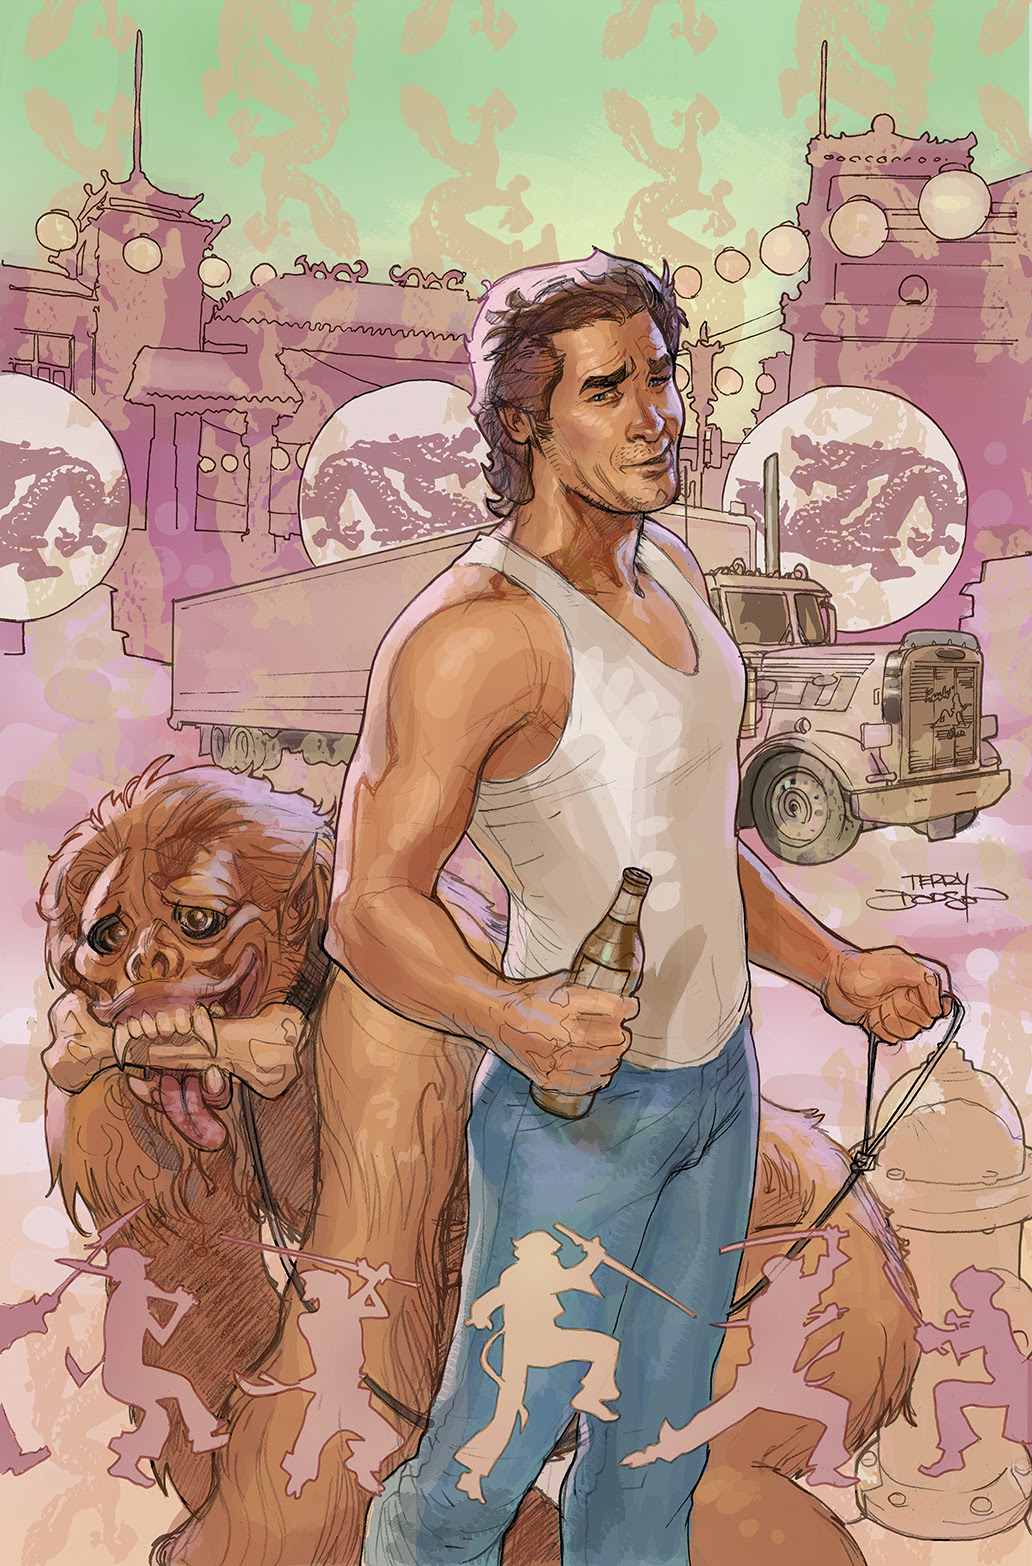 BIG TROUBLE IN LITTLE CHINA #1 Cover D by Terry Dodson